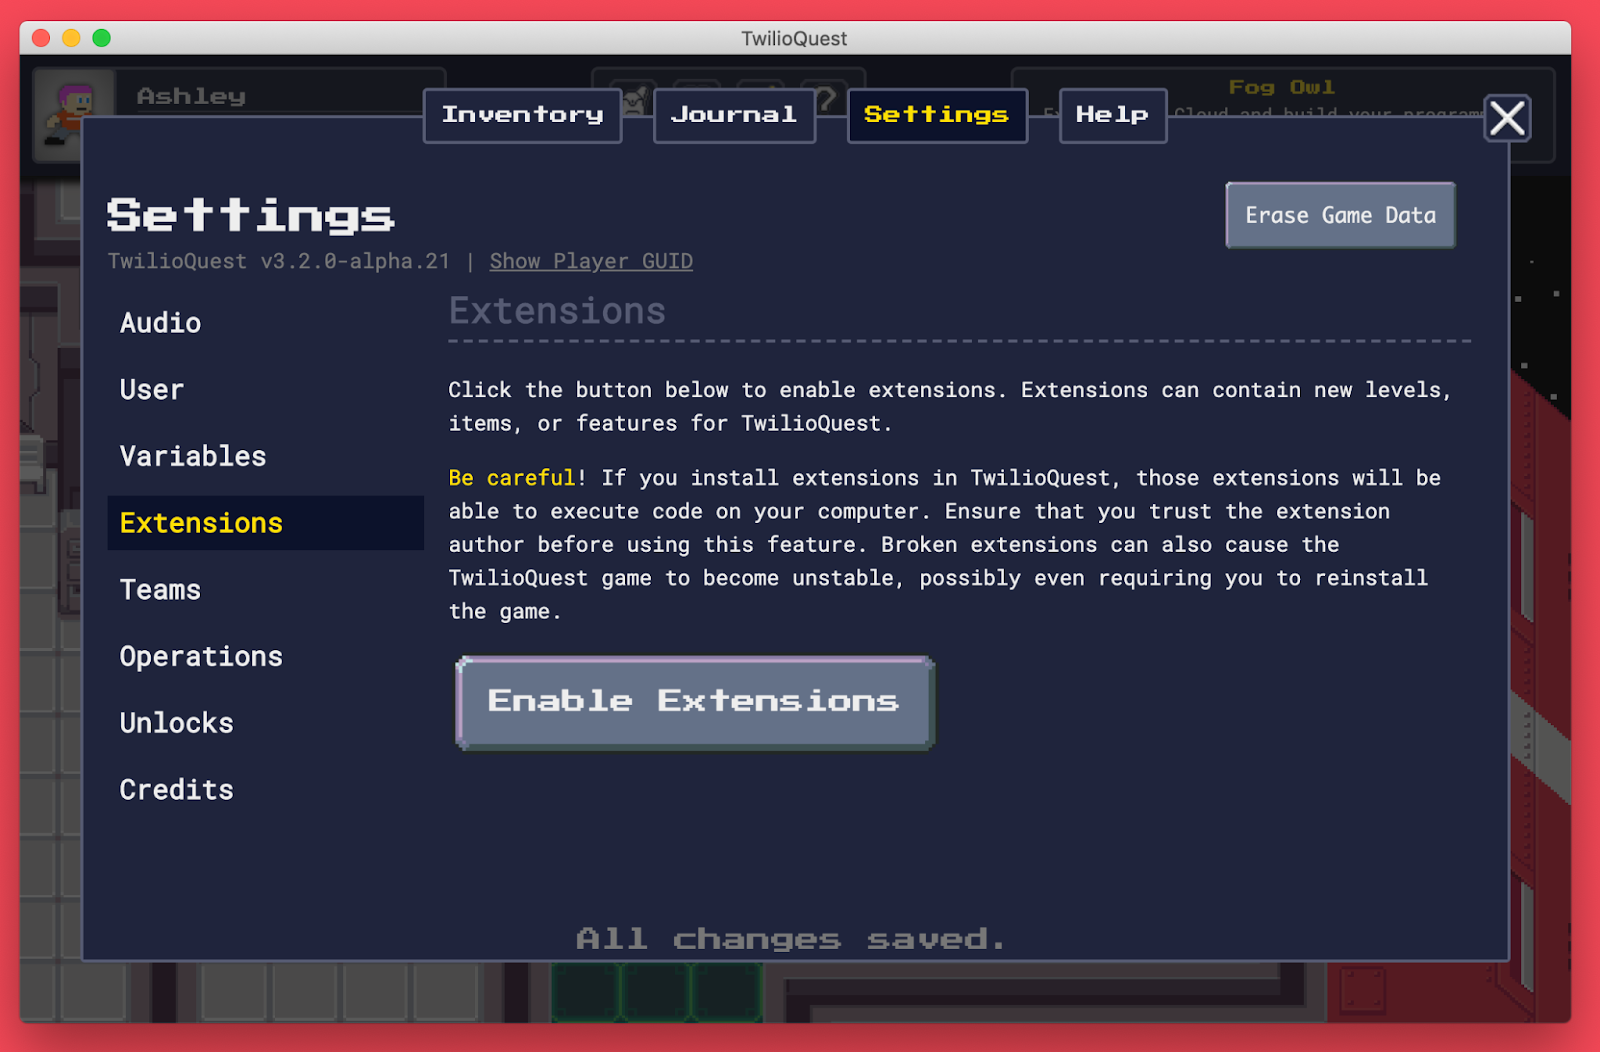 Screenshot of the TwilioQuest extensions settings panel in the main settings menu. There is a button that says Enable Extensions.